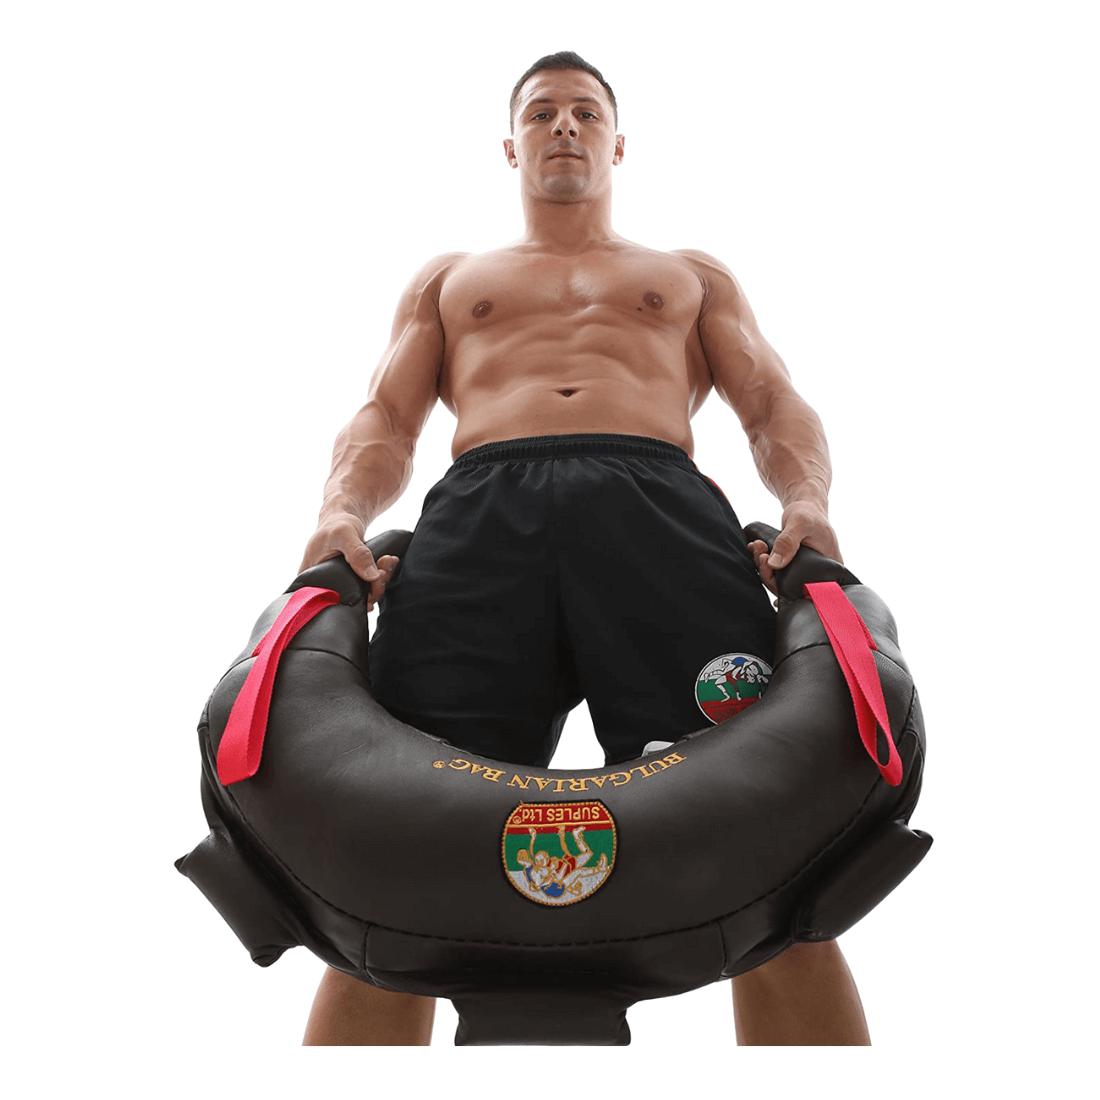 BASIC Bulgarian Bag Workout for Complete Beginners